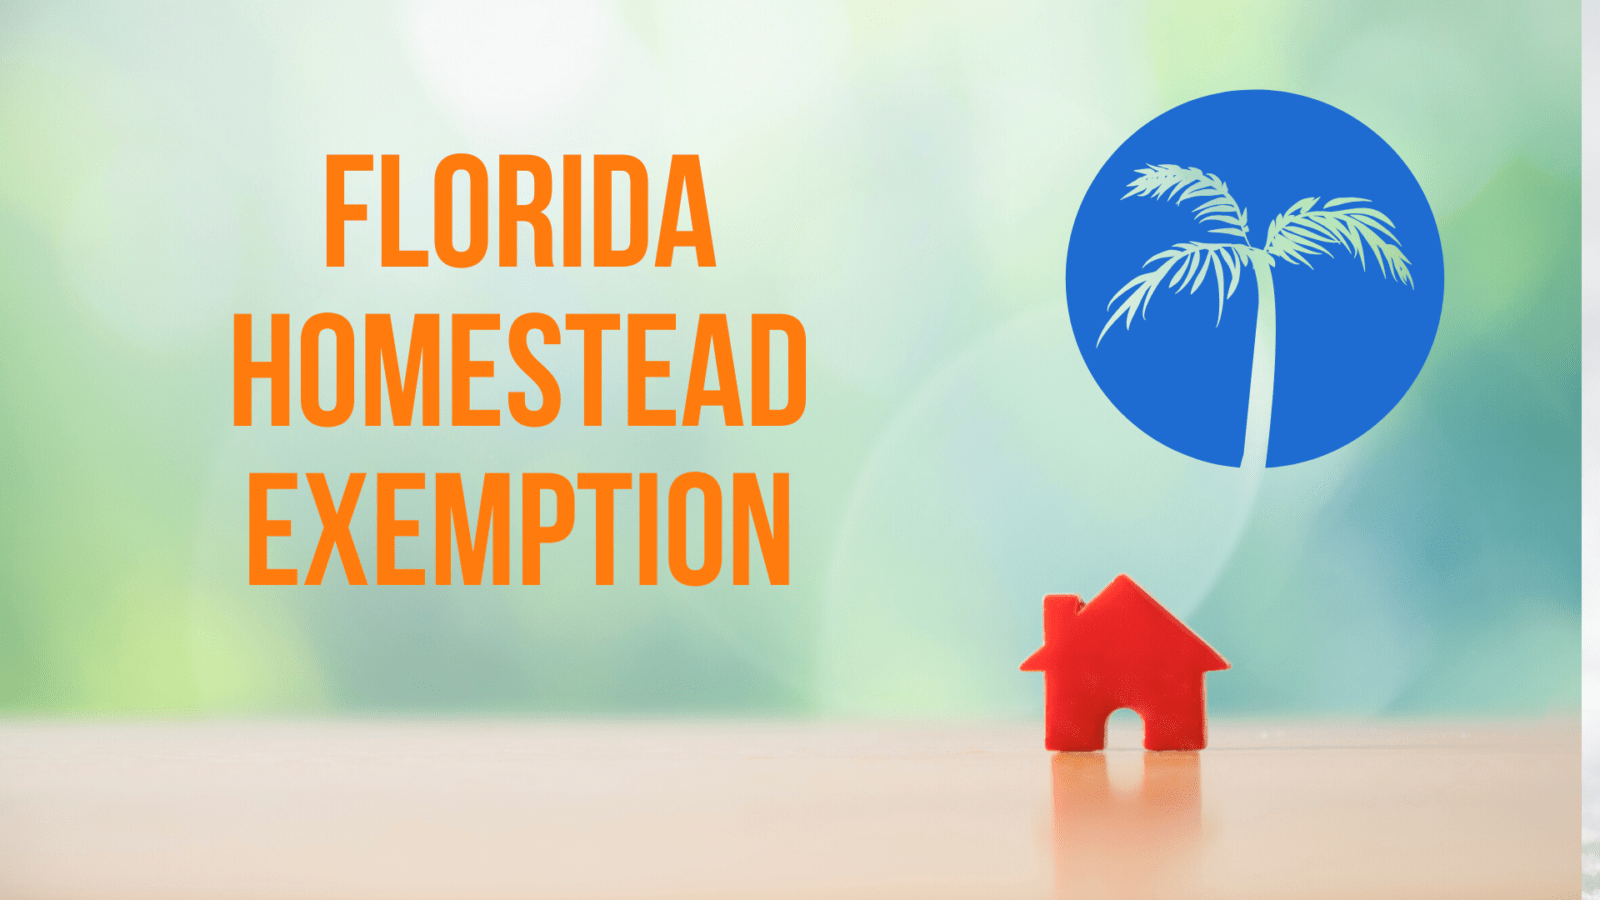 How Do You Qualify For Florida's Homestead Exemption?